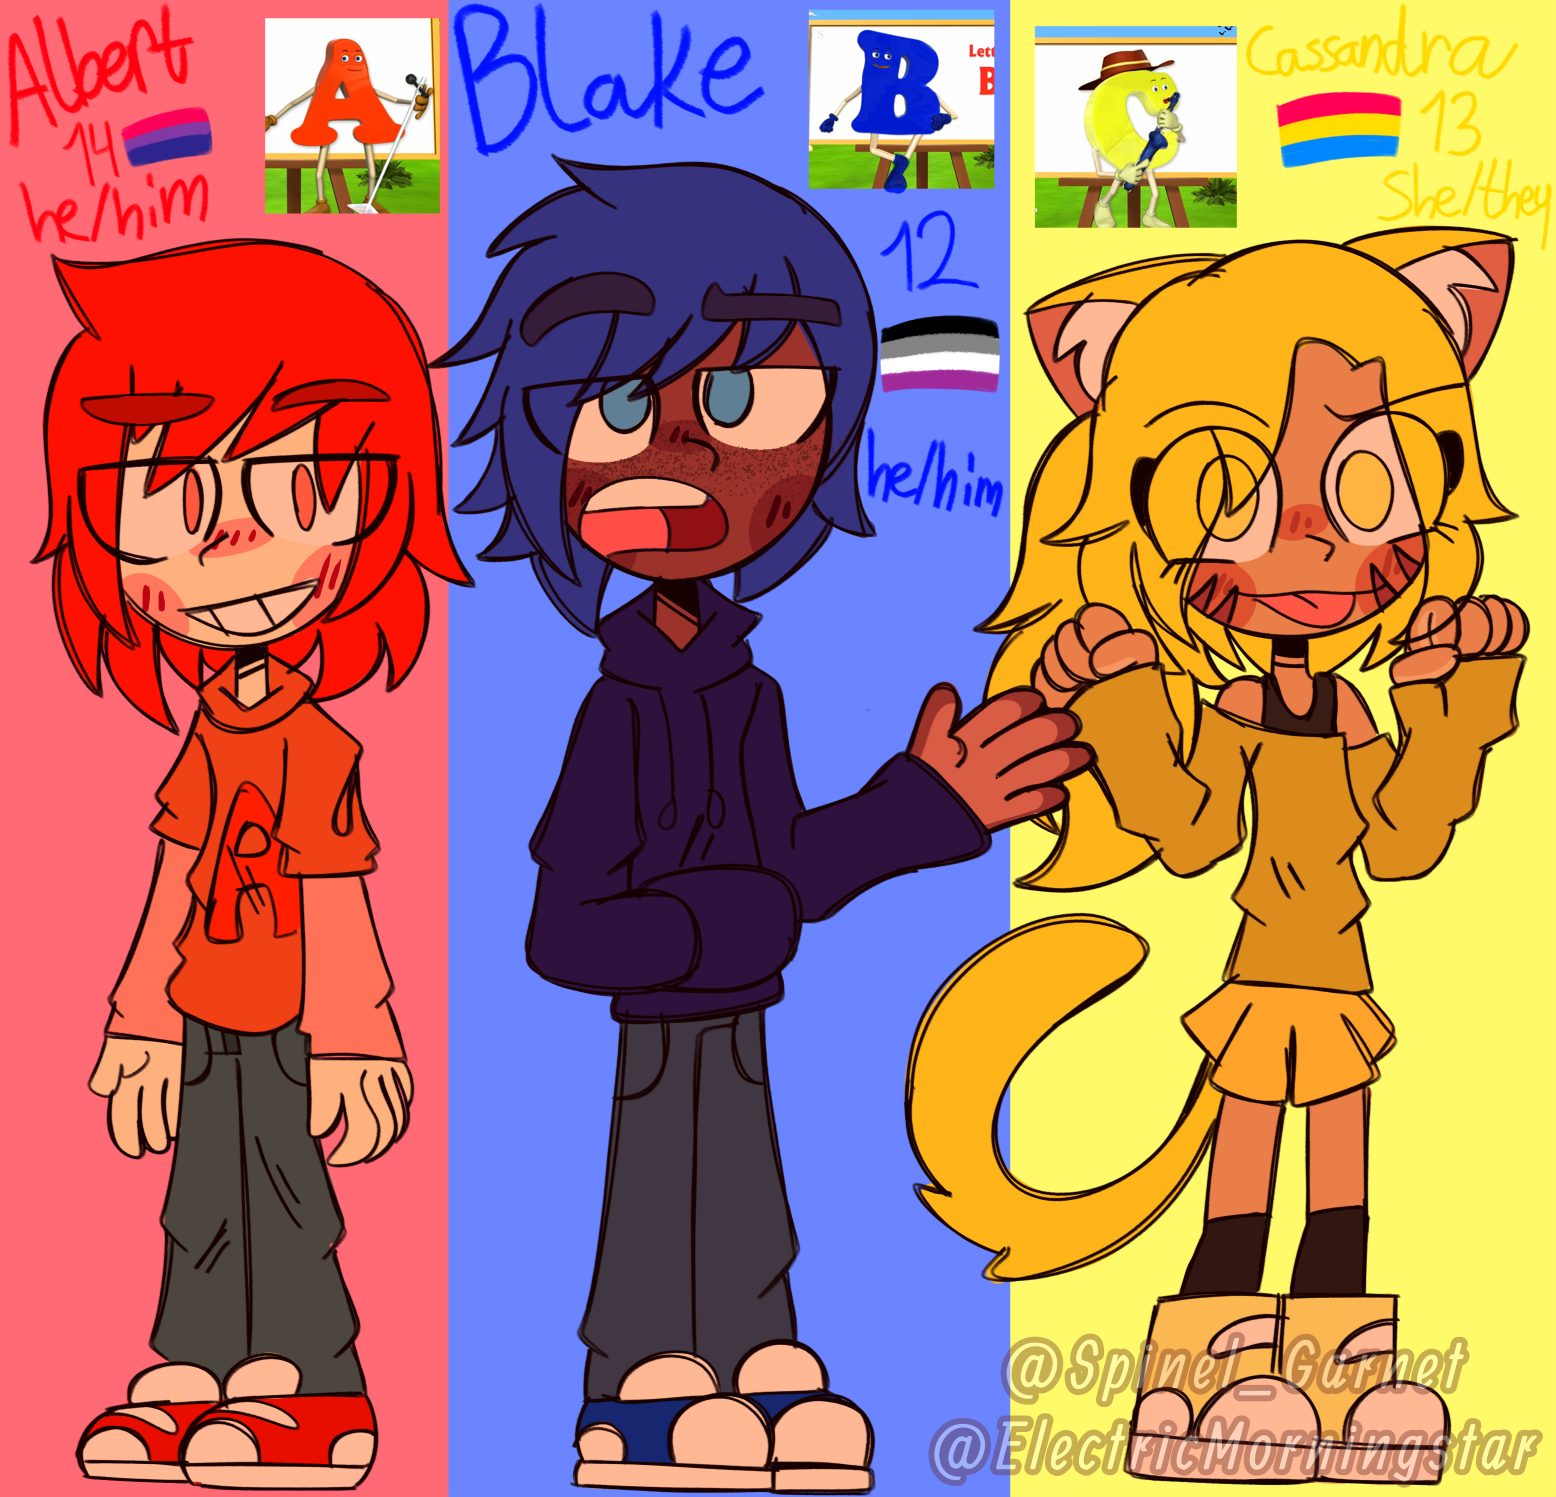 Humanized alphabet lore letters part 1 by ElectricMorningstar on DeviantArt